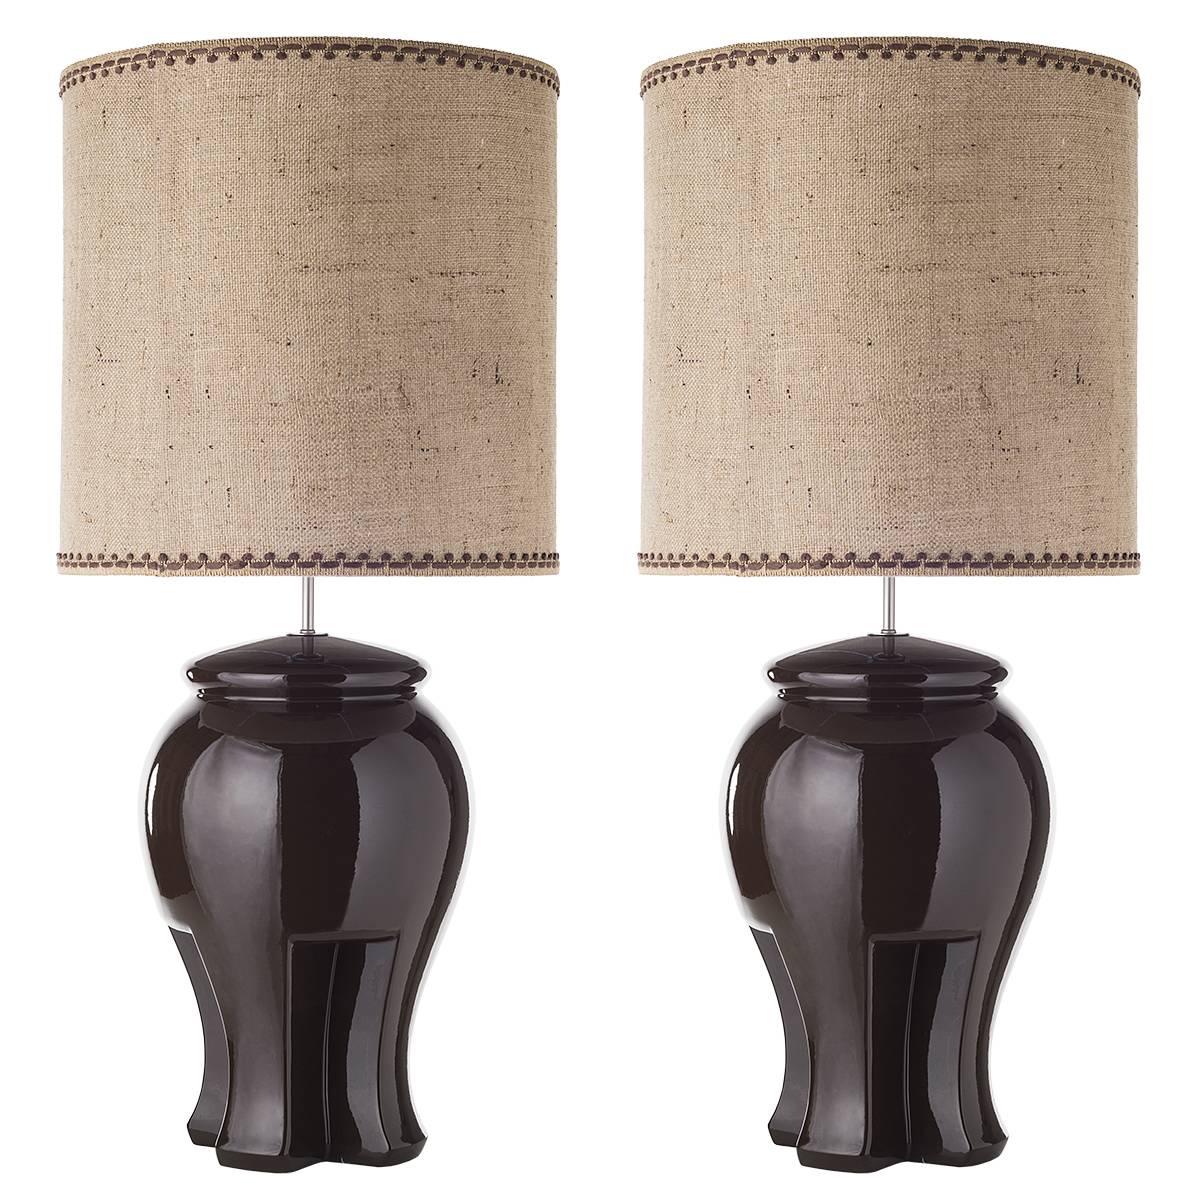 Pair of Rounded Ceramic Table Lamps For Sale